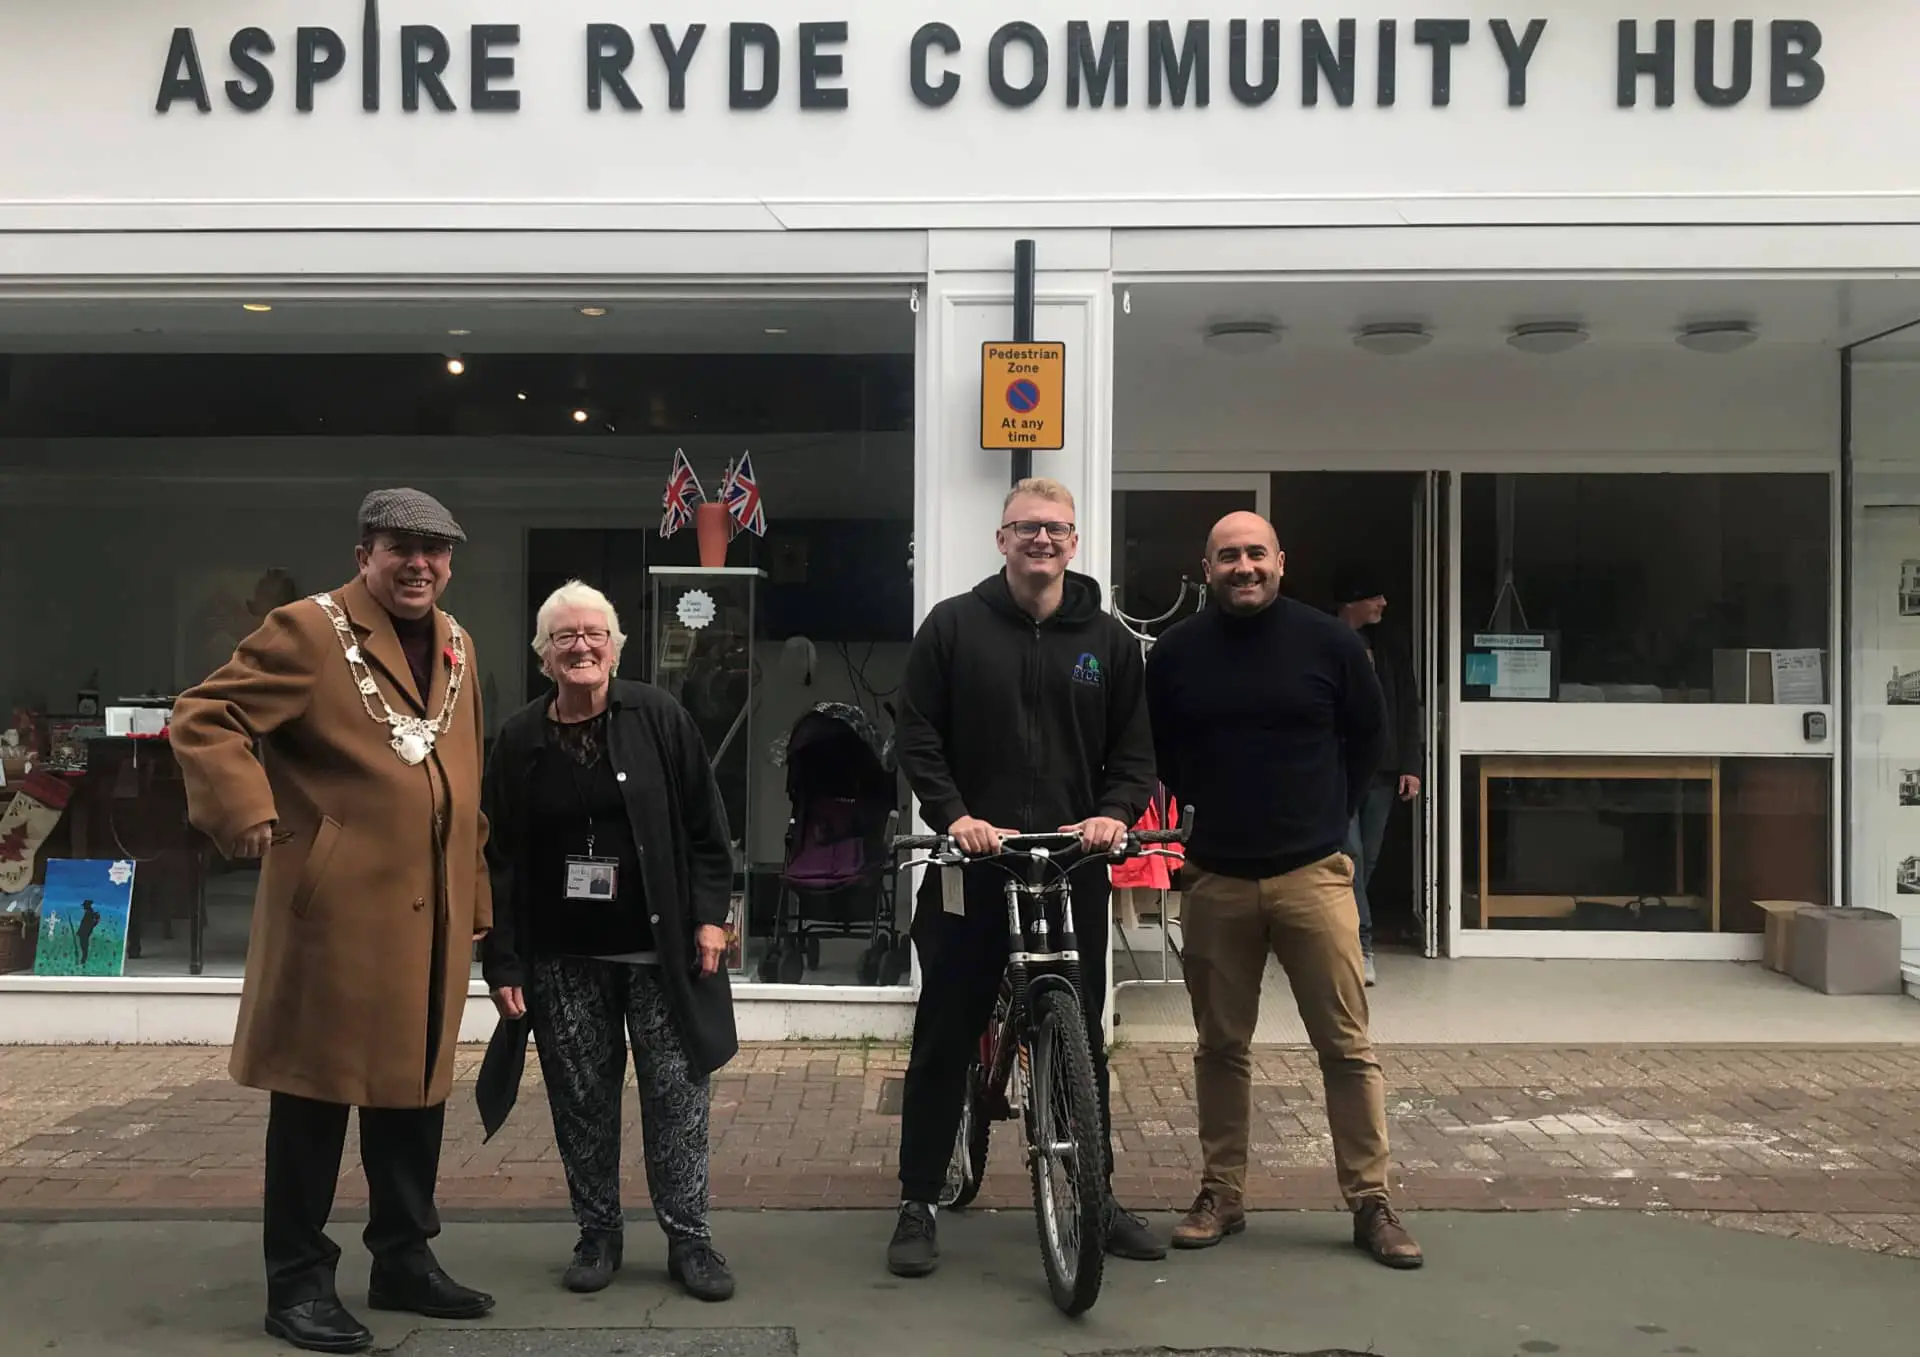 Councillors outside the Aspire community hub with the bike and staff member